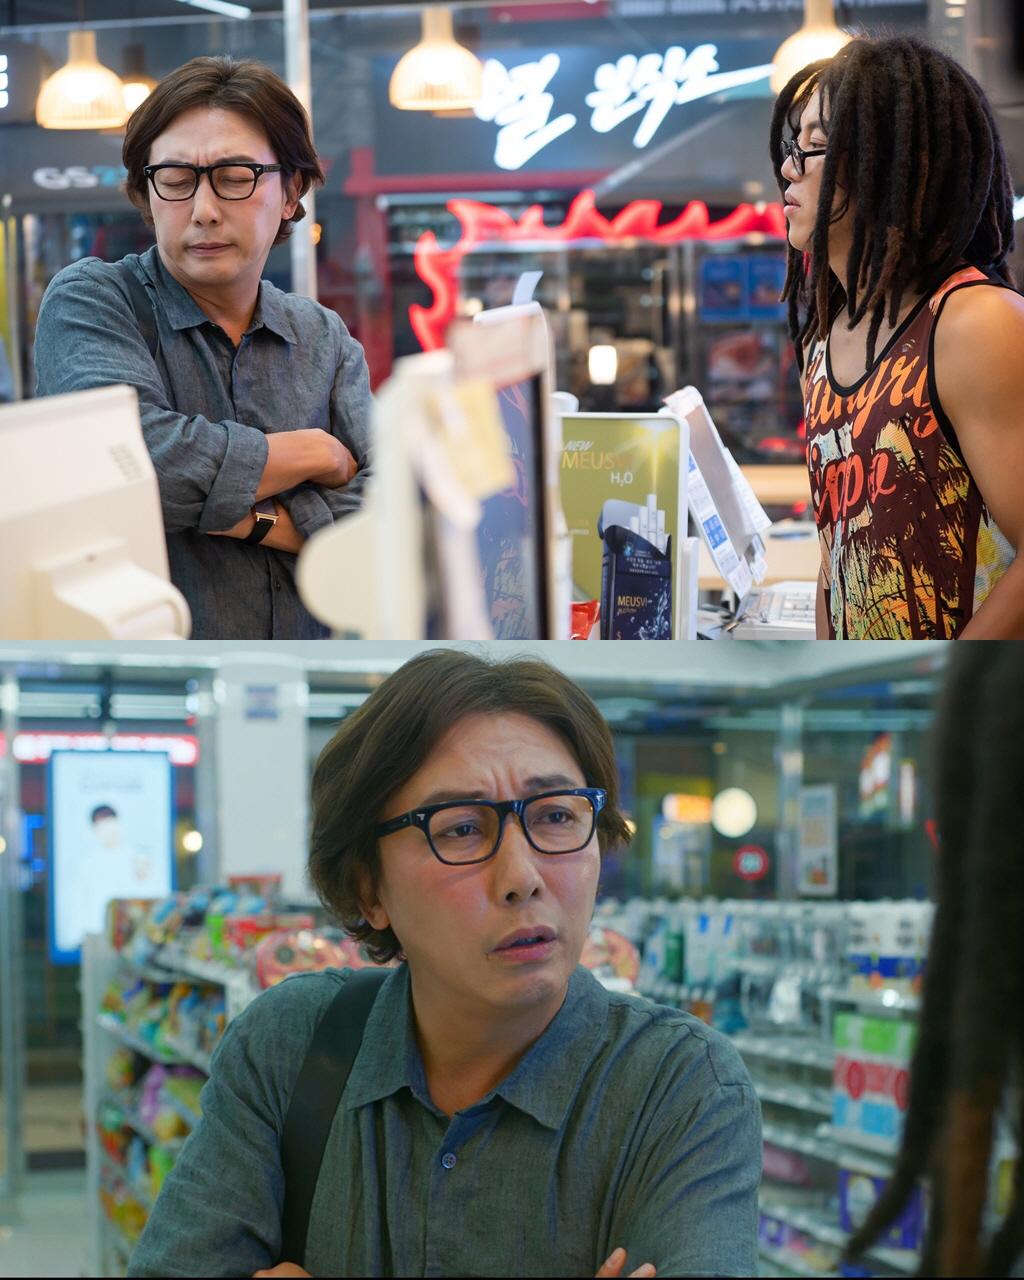 Tak Jae-hun will be on the cameo restaurant Convenience store morning star.SBS Jackson Convenience store morning star is the only SEK watch point, and it is fun to wait for cameos appearing every time.Cameos who do not know when and when they will appear are considered to be the charm of Convenience store morning star.In the meantime, the production team of Convenience store morning star is announcing the news of Tak Jae-huns SEK appearance on the 5th broadcast today (3rd), and is concentrating attention on the enthusiastic viewers.Tak Jae-hun will appear as a guest coming in to buy drinks at Convenience store night time.The still cut, which was released before the broadcast, was already caught by Tak Jae-hun, who was already drunk.Tak Jae-huns realistic facial expression, which makes you feel 100% of alcohol, also attracts Eye-catching.The Sulton Makeup, which is frowned on and is reddish in both cheeks, adds comicality and laughs.In front of this Tak Jae-hun, there is a friend Han Dal-sik (Mun Moon-seok) of Choi Dae-heon (Mun Jang) who is not part time job Jeong Sae-byeol (Yu-Jeong) but attracts Eye-catching.The absence of a star is a point that stimulates curiosity.The star is emptying the counter and wondering where he went, how he was running a part time job, and what happened to the Convenience store.Earlier, Choi Dae-heon and the Convenience store where the star worked attracted a variety of cameos to attract Eye-catching.Yubi is a dog mother guest who loves and loves dogs, and Jung Jun-ho appeared as actor Jung Jun-ho and left a sign on the Convenience store.Ahn Chang-hwan, who appeared as a nighttime Alba applicant, met with Mung Mun-seok who came to the Convenience store and enjoyed the audience by comically Acting the reunion of In addition, Convenience store morning star is getting a great response by doubling the fun of the drama with various cameo use.Tak Jae-hun, who will appear today (the third day), is drawing attention to what kind of sparkling fun he will have.The fifth episode of The Convenience Store Morning Star on SBSs Golden Tod, starring Tak Jae-hun on SEK, airs today (3rd) at 10 p.m.